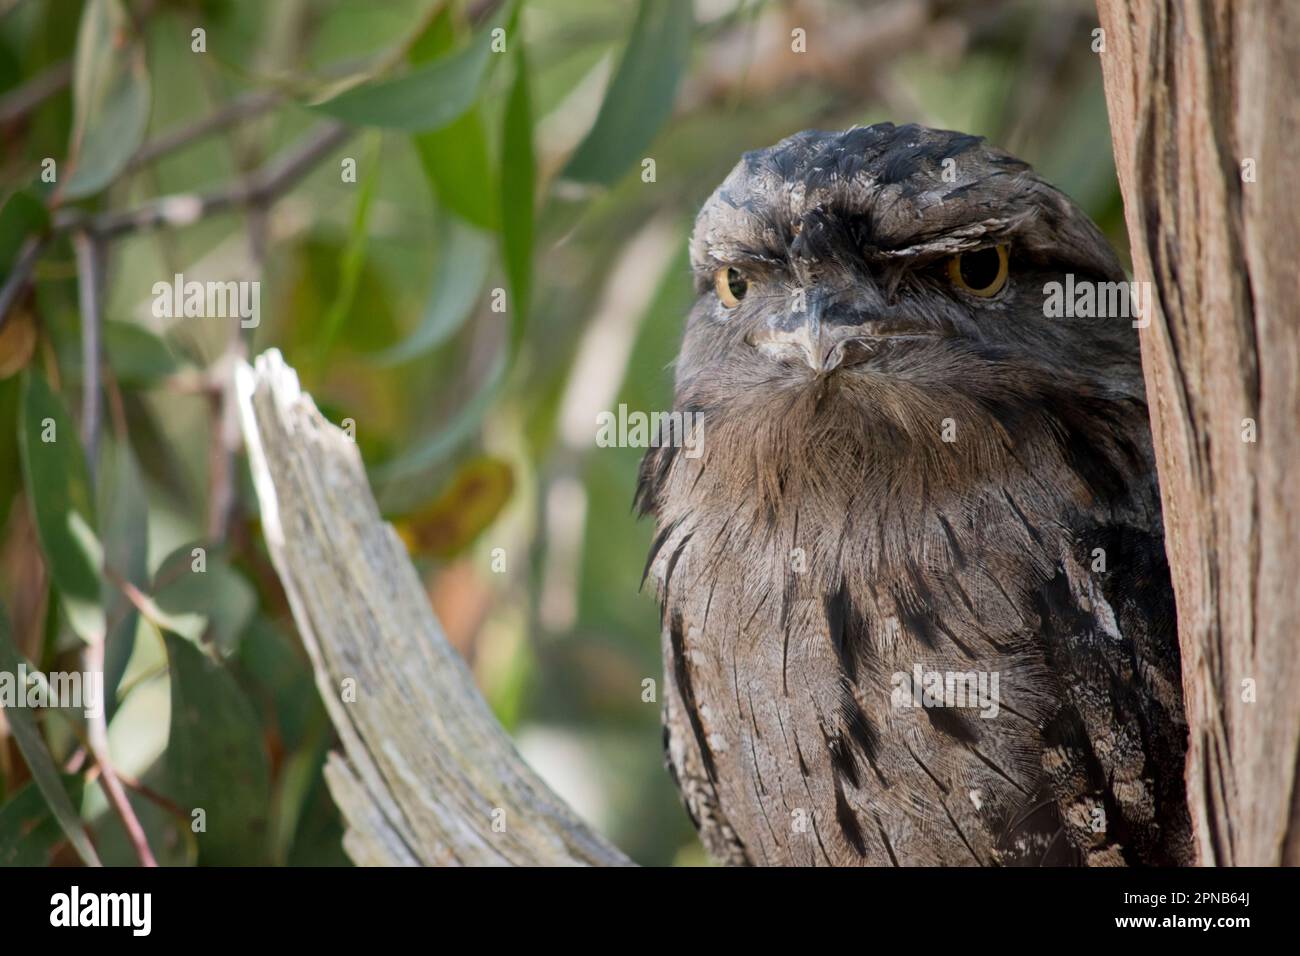 the tawny frogmouth has a mottled grey, white, black and rufous – the feather patterns help them mimic dead tree branches. Their feathers are soft, li Stock Photo